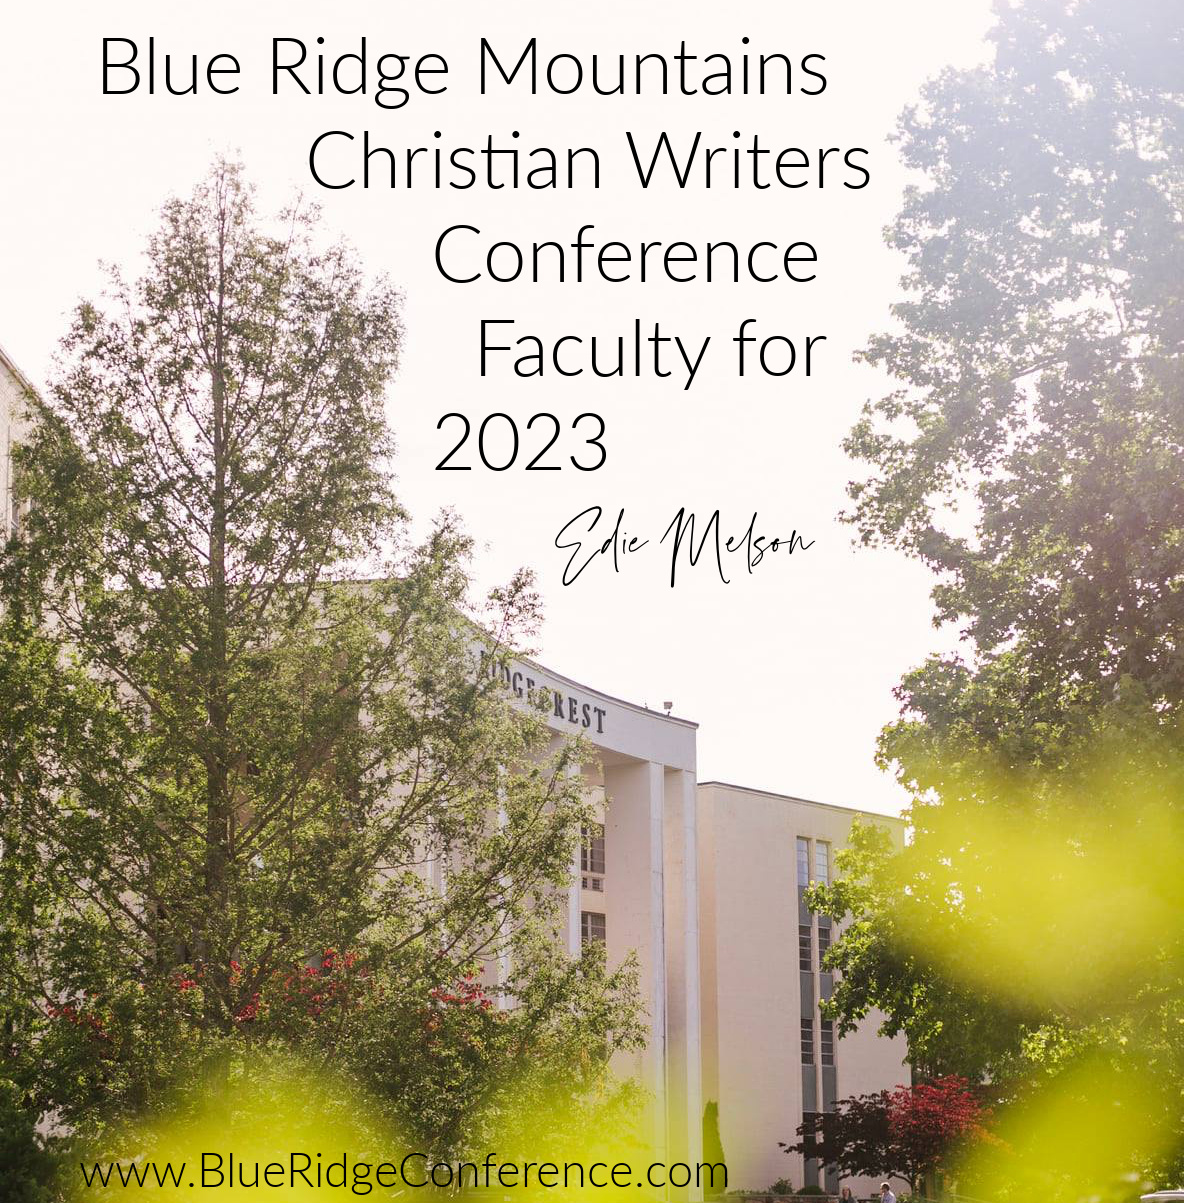 Blue Ridge Mountains Christian Writers Conference Faculty for 2023